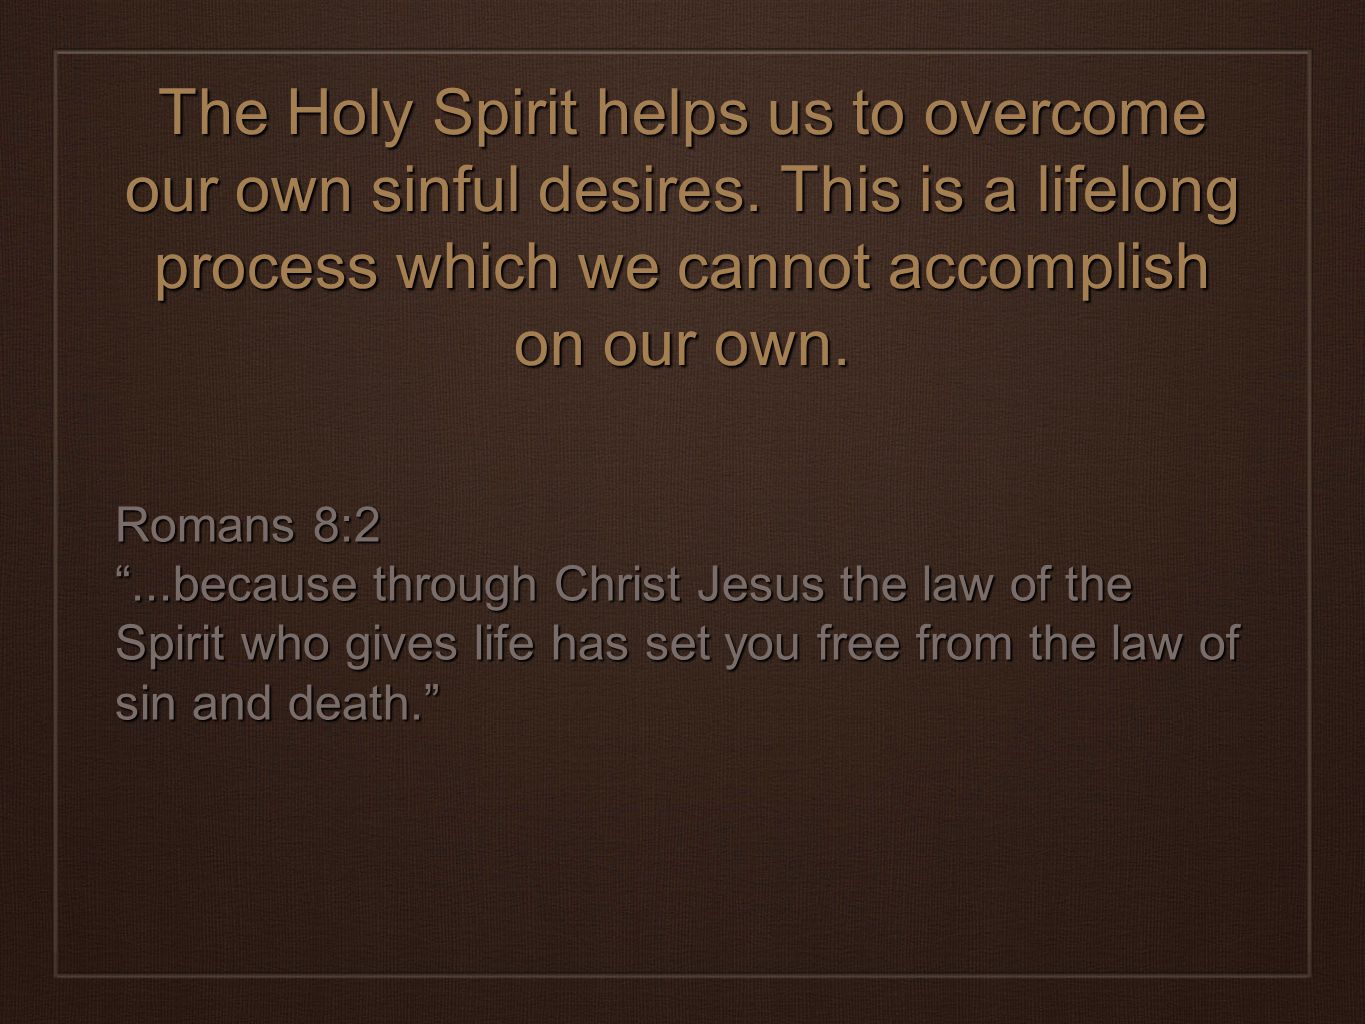 The Holy Spirit helps us to overcome our own sinful desires.